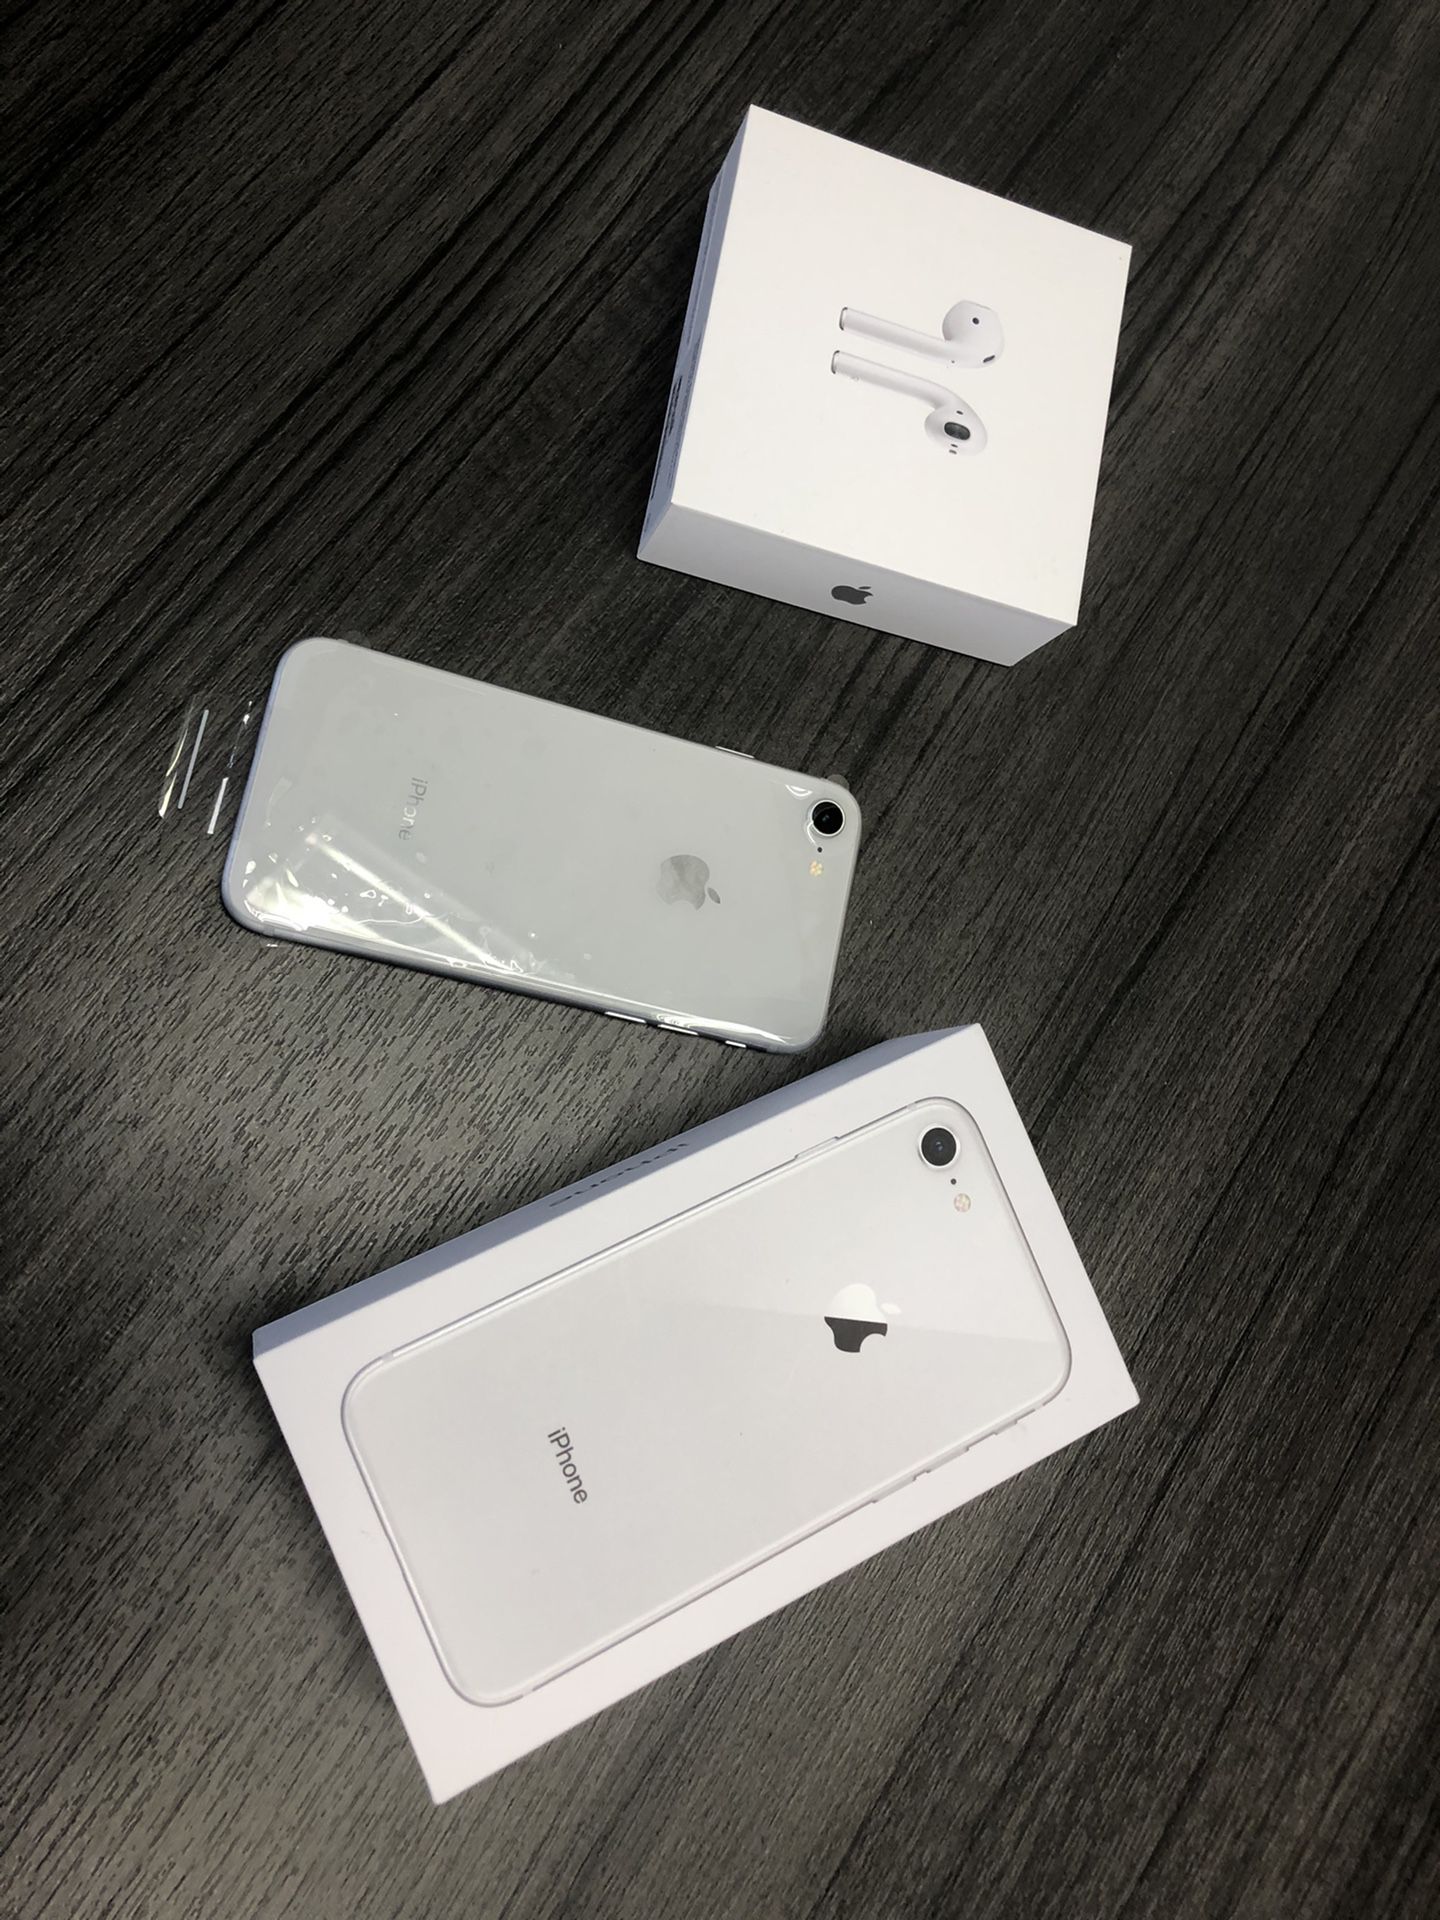 iPhone 8 in like new pristine conditions 64 GB with matching EarPods